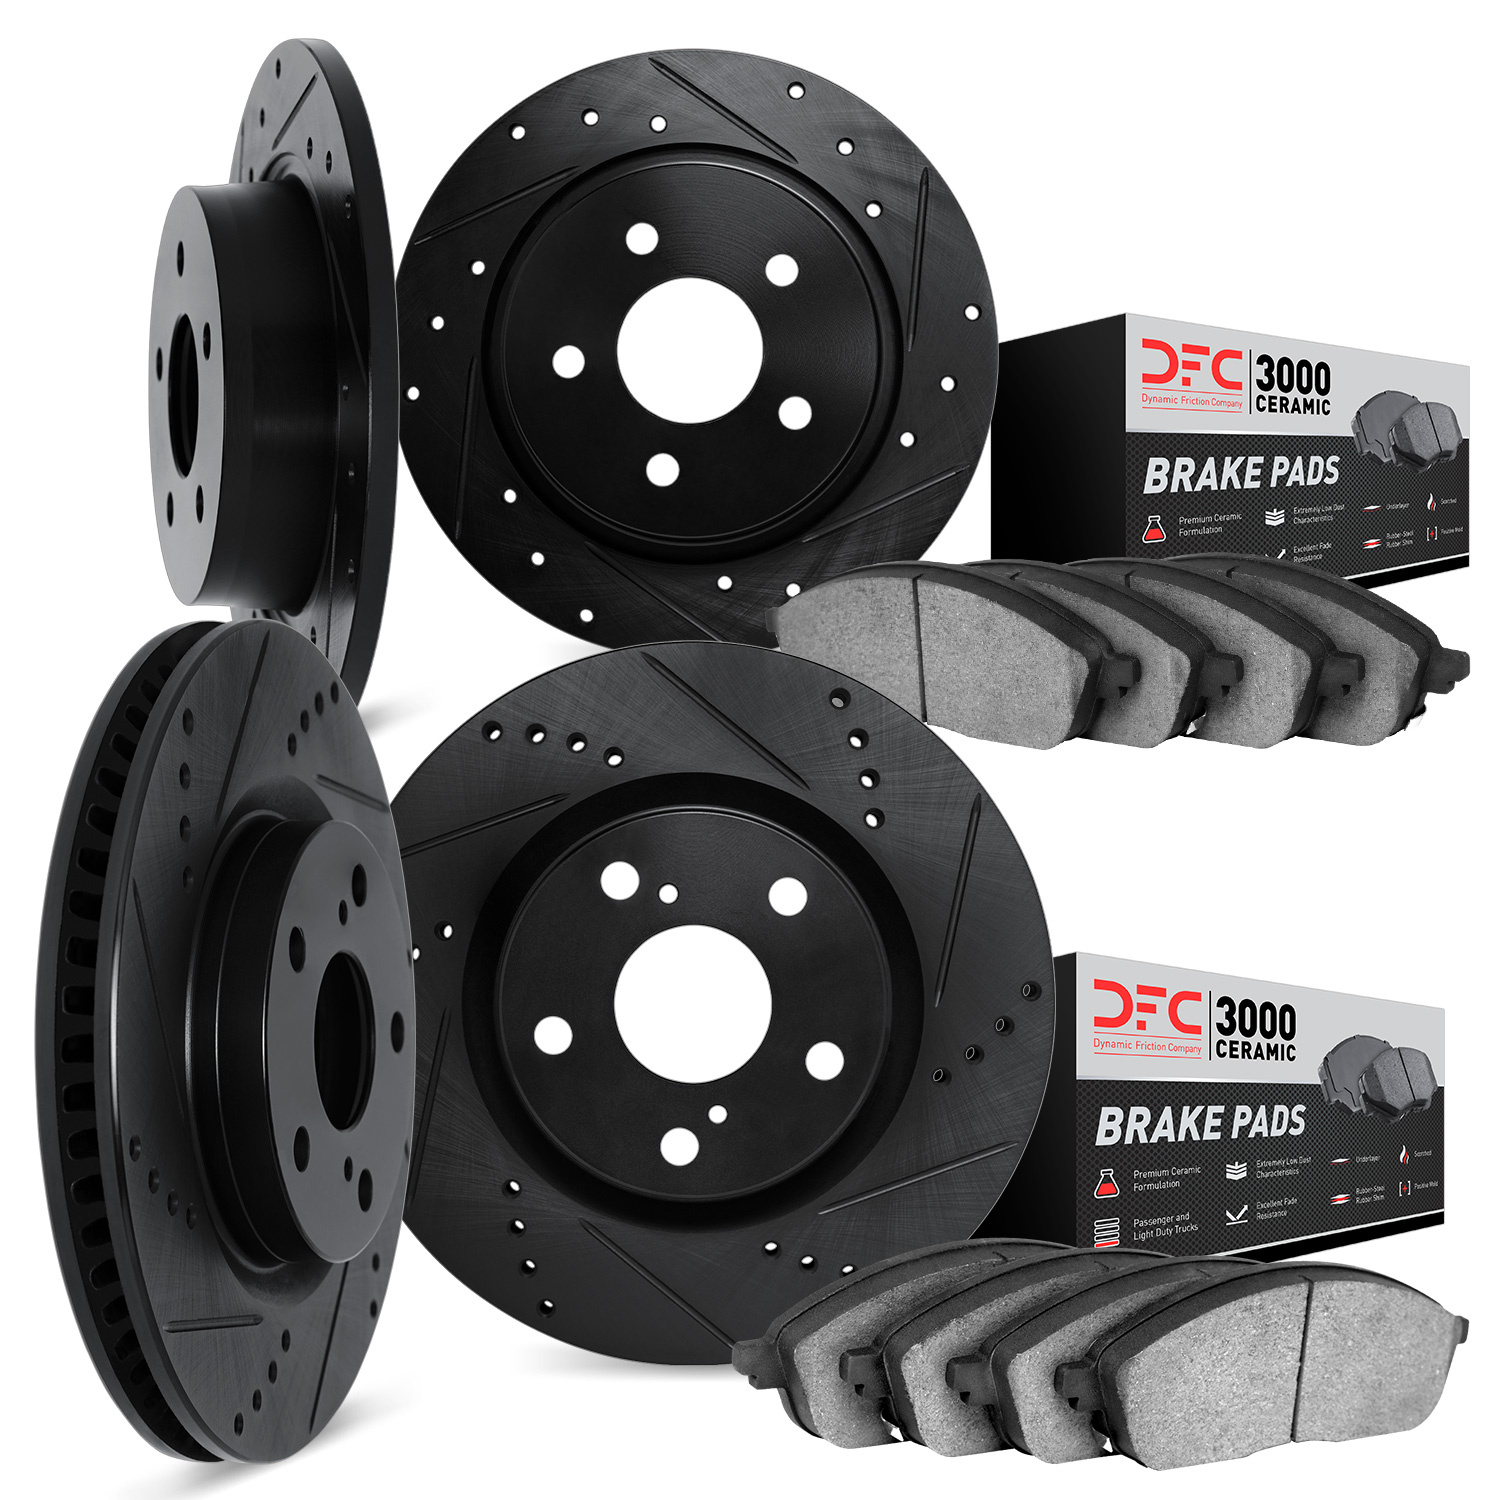 8304-59080 Drilled/Slotted Brake Rotors with 3000-Series Ceramic Brake Pads Kit [Black], 2017-2020 Acura/Honda, Position: Front